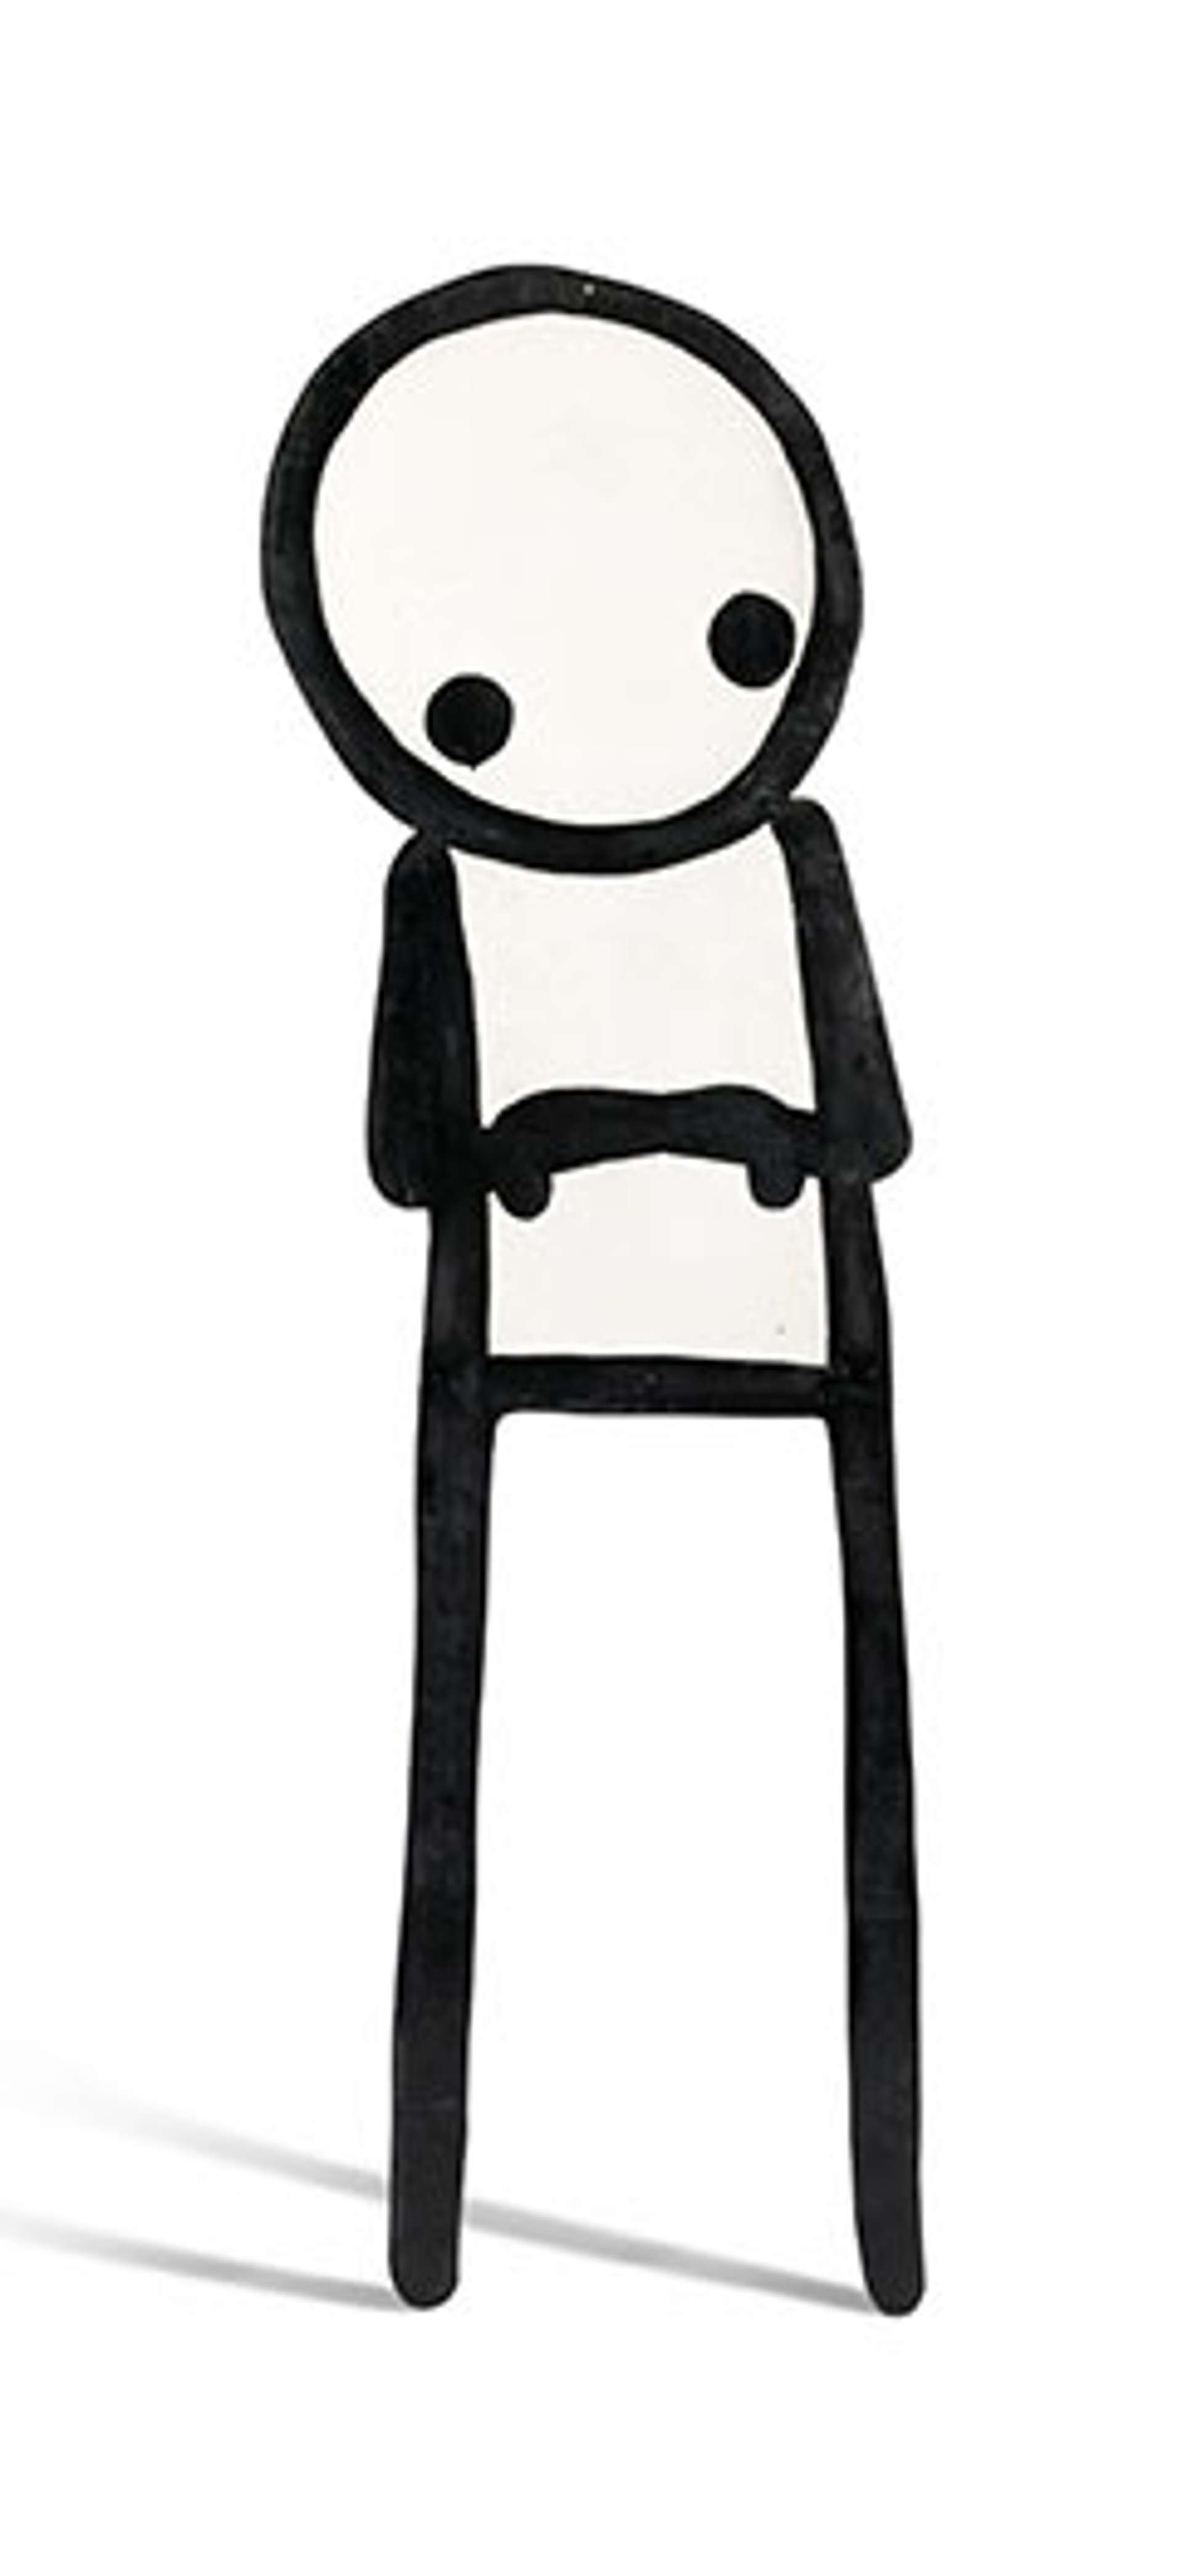 Up On The Roof by Stik